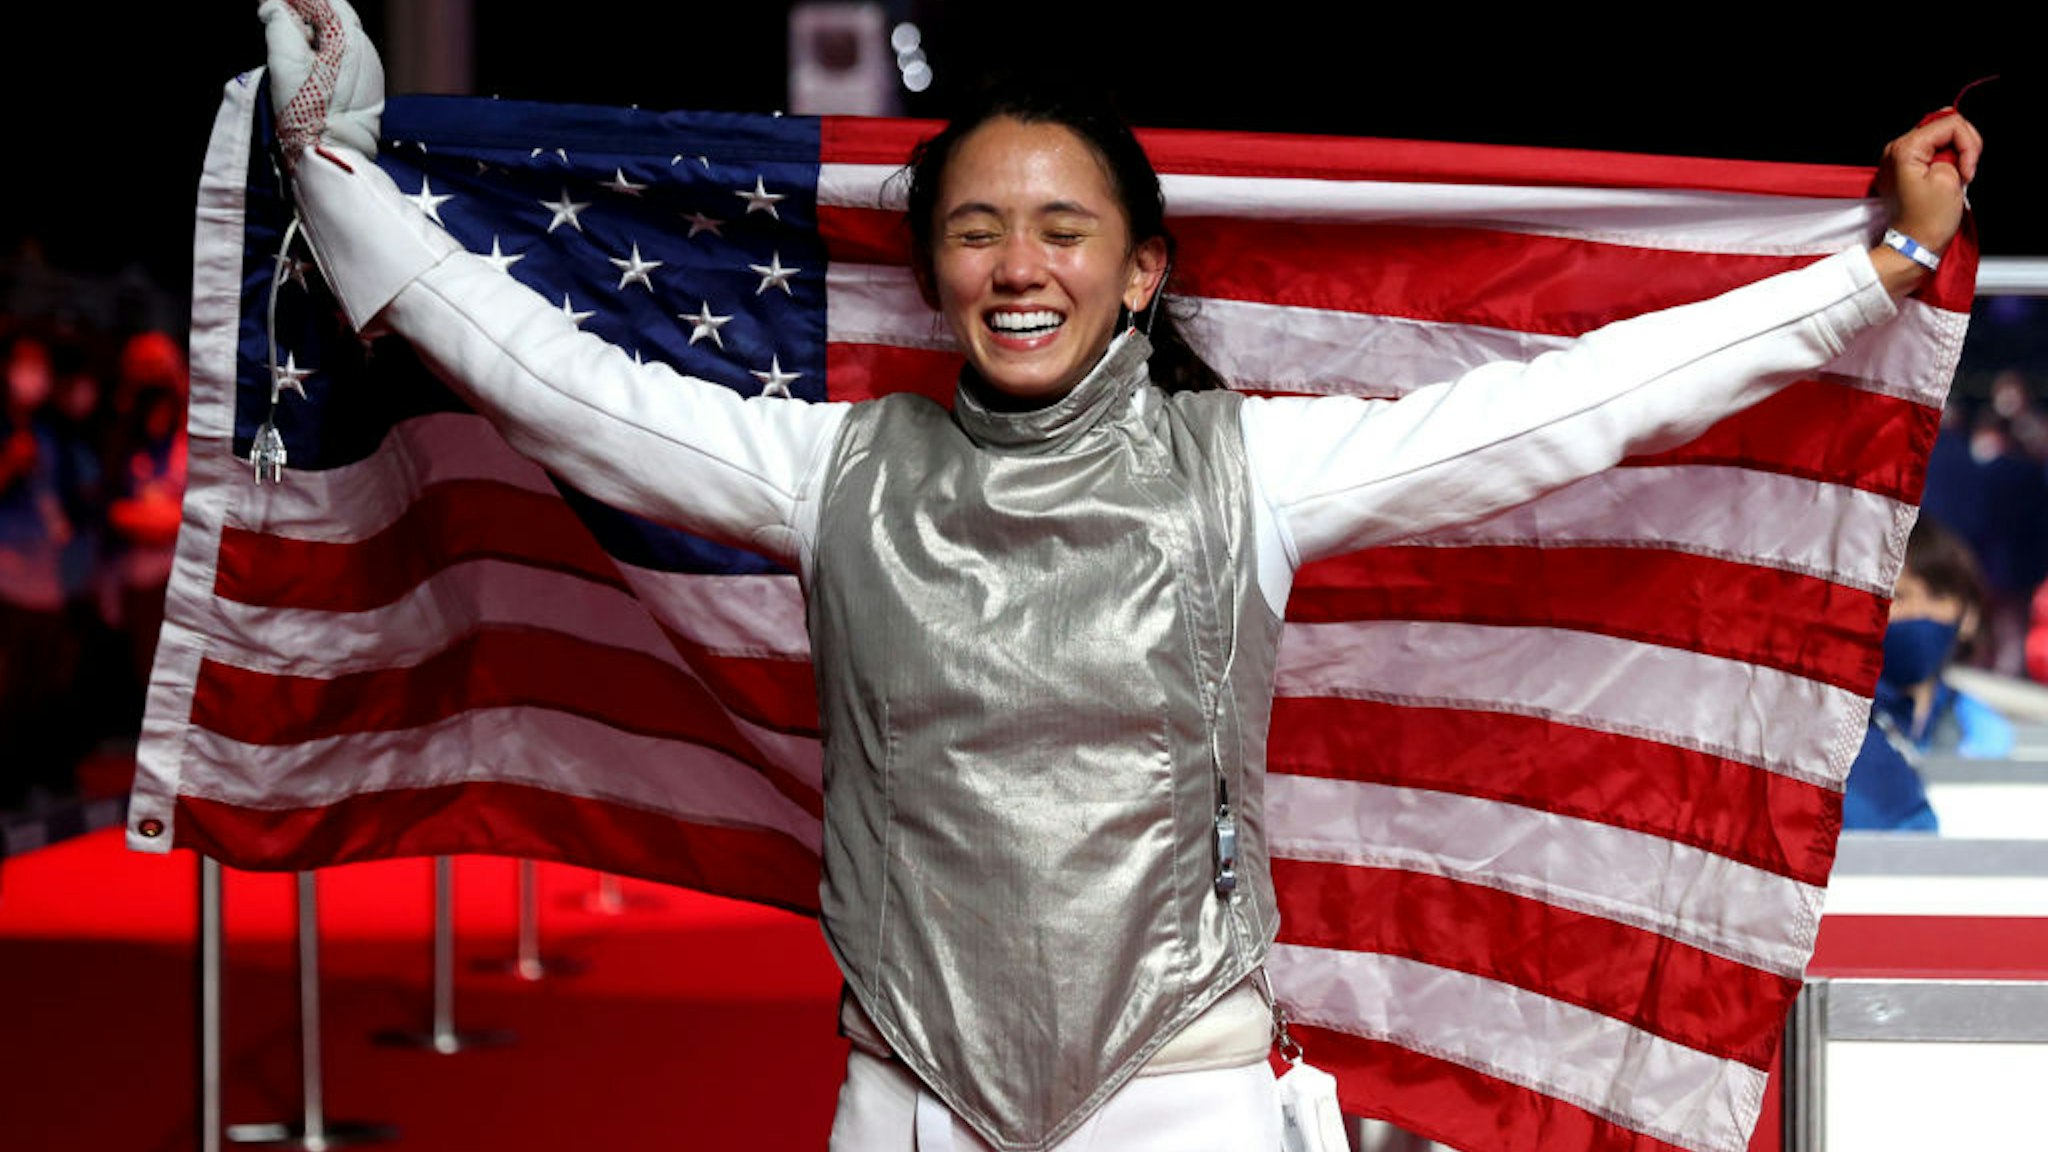 CHIBA, JAPAN - JULY 25: Lee Kiefer of Team United States celebrates winning the Women's Foil Individual Fencing Gold Medal Bout against Inna Deriglazova of Team ROC on day two of the Tokyo 2020 Olympic Games at Makuhari Messe Hall on July 25, 2021 in Chiba, Japan. (Photo by Elsa/Getty Images)